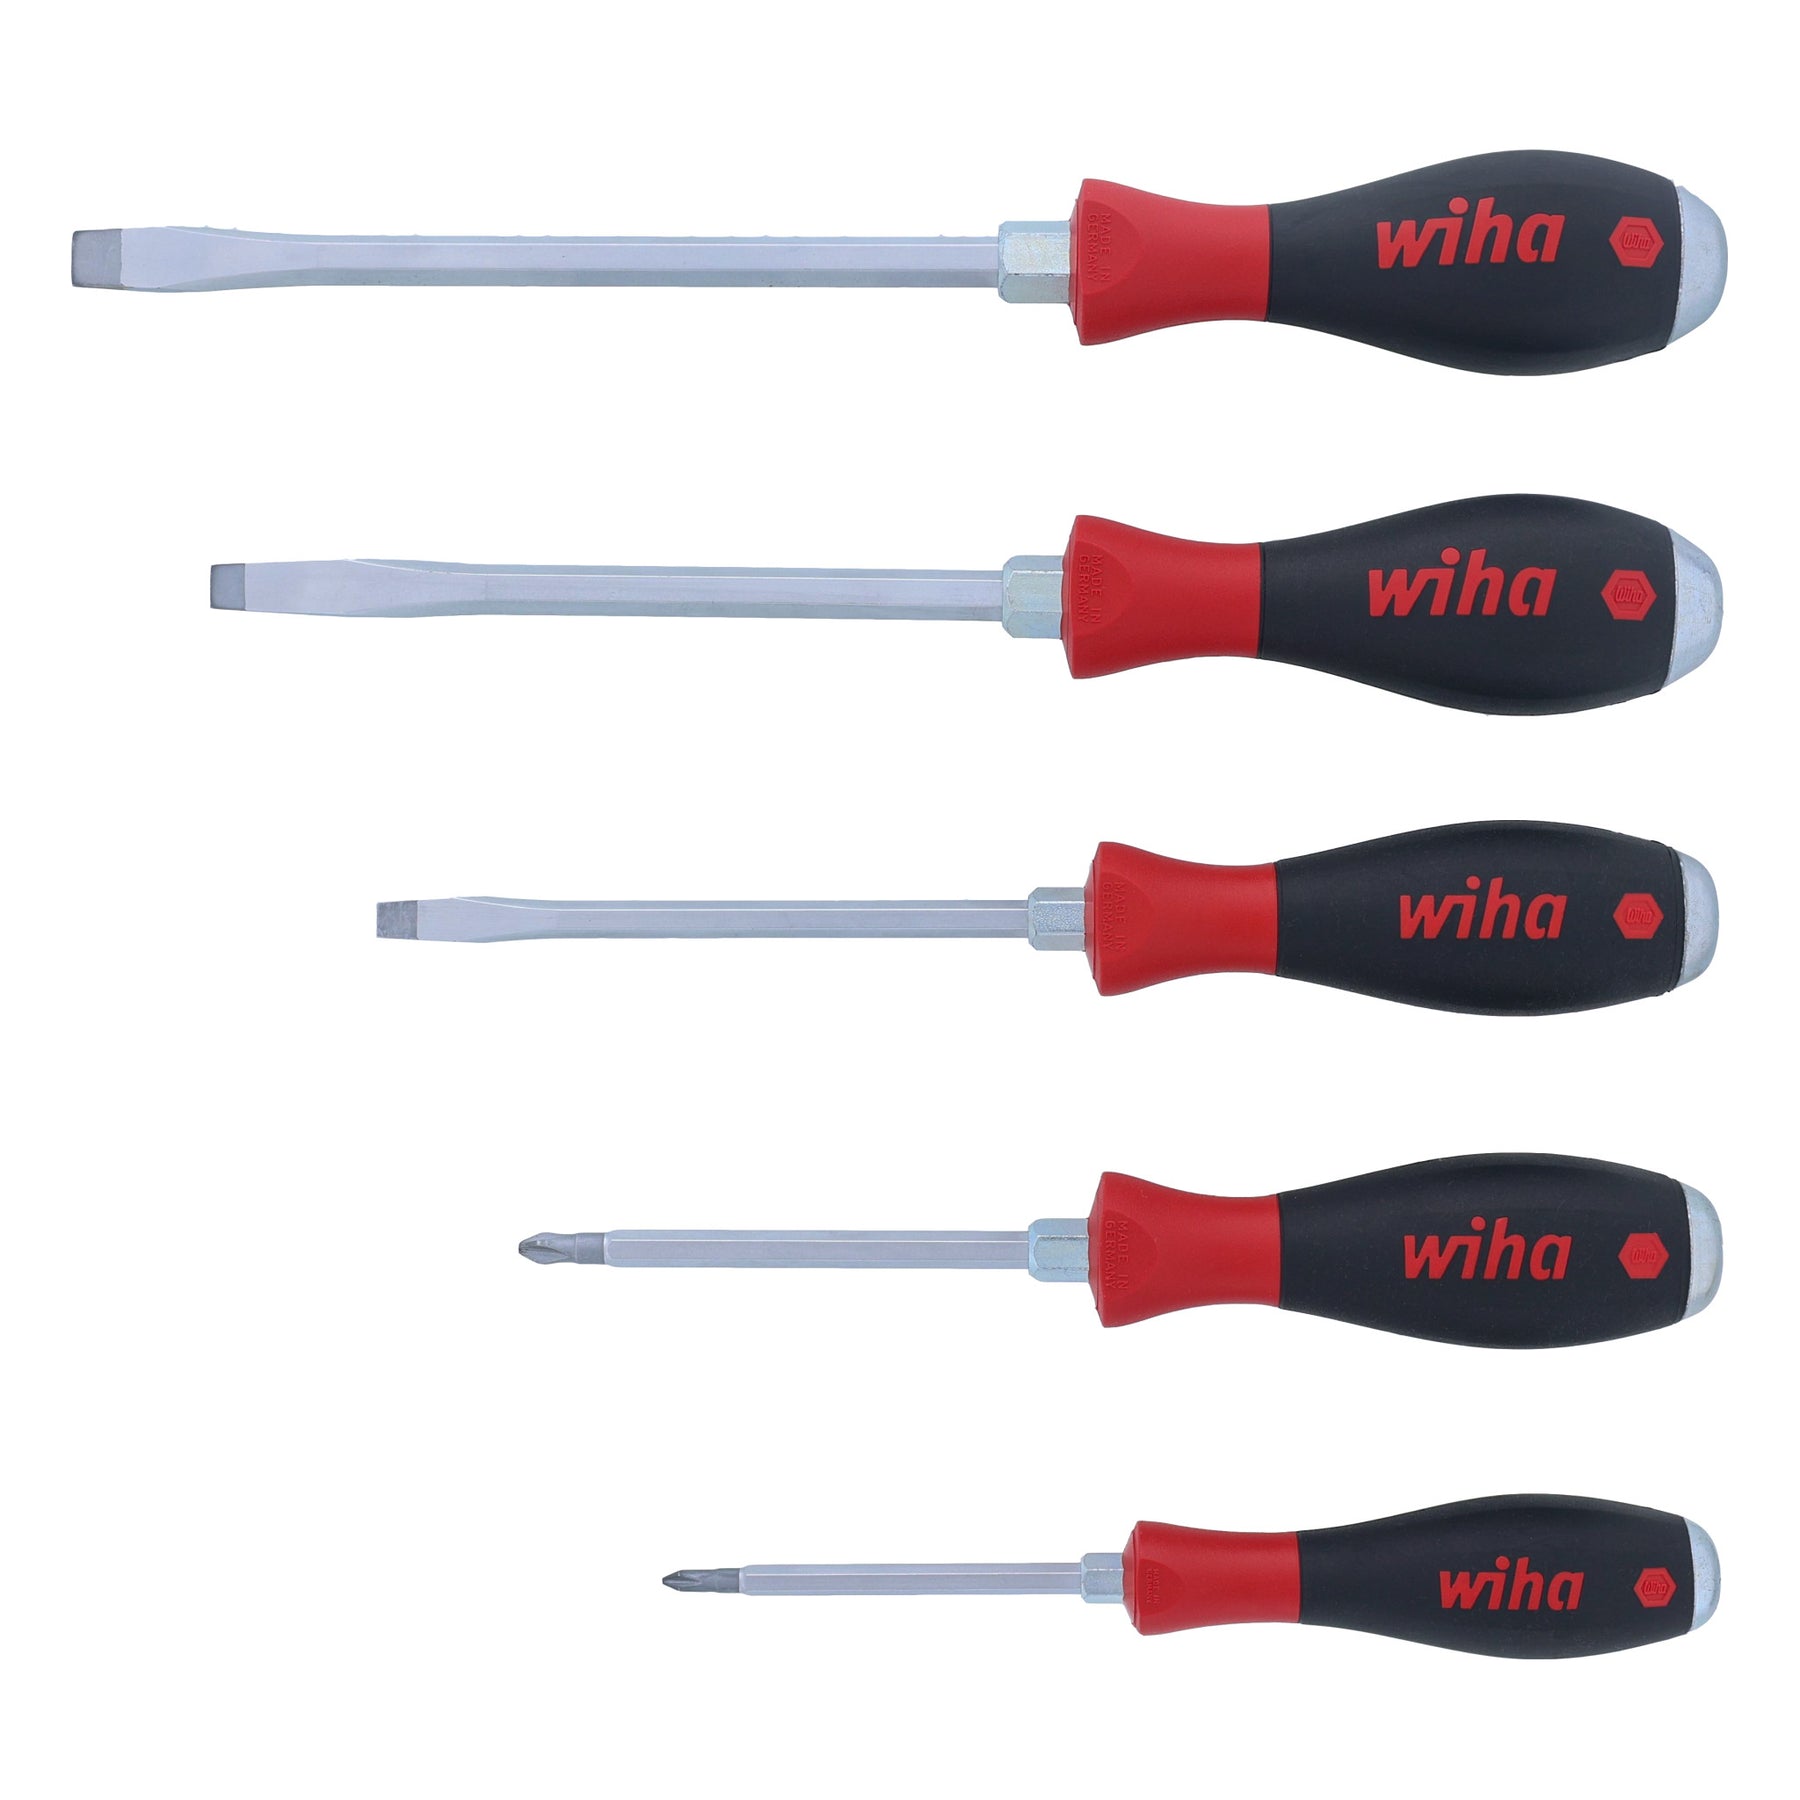 5 Piece SoftFinish X Heavy Duty Slotted and Phillips Screwdriver Set